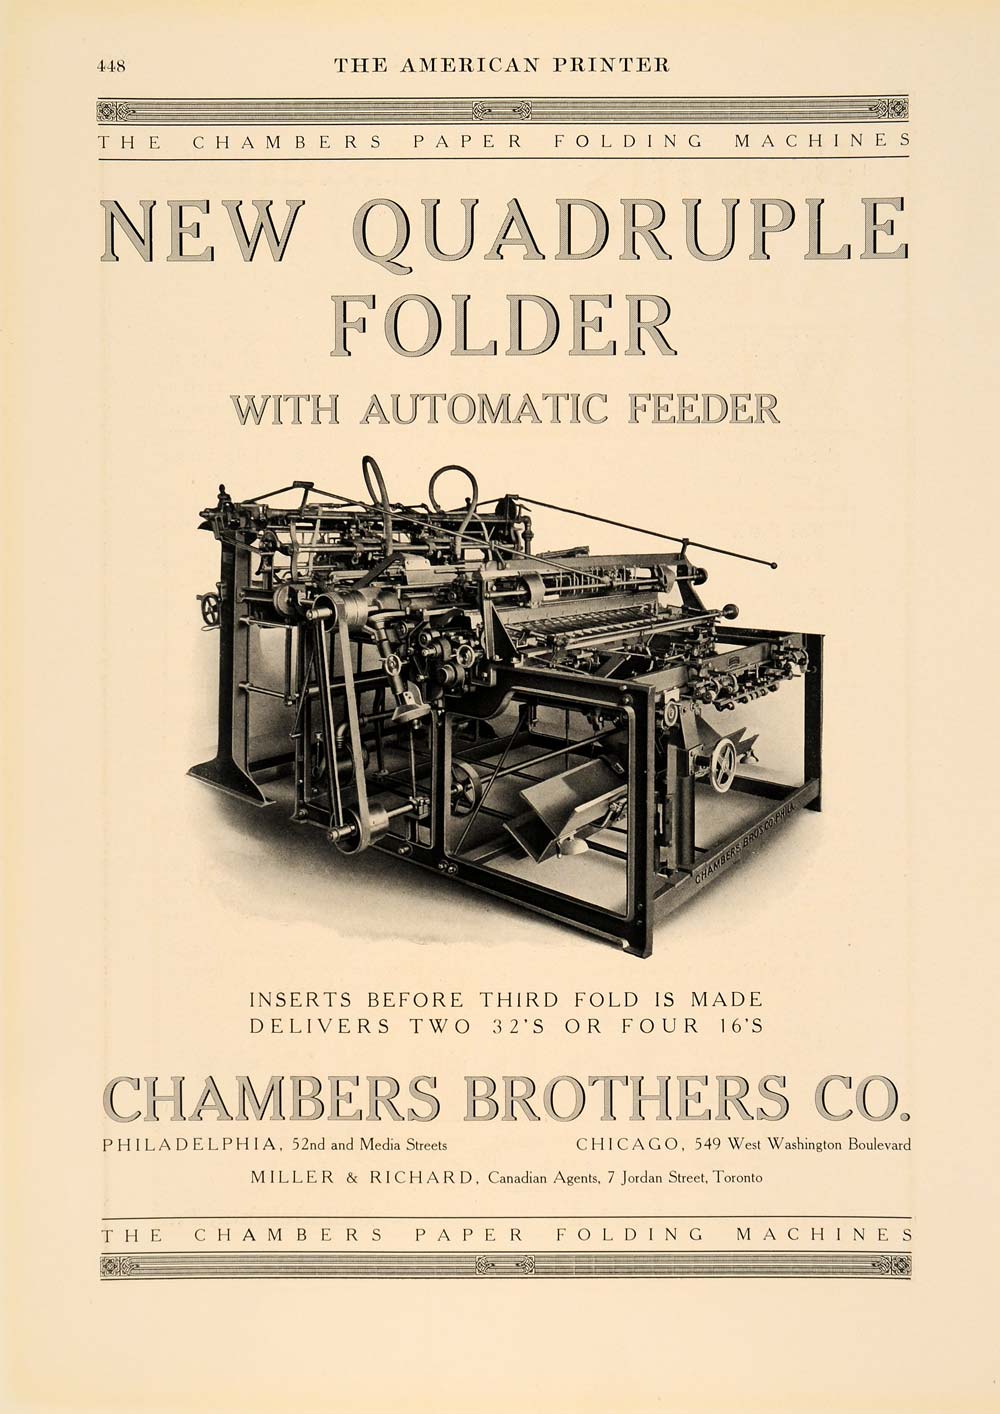 1913 Ad Chambers Brothers Paper Folder Automatic Feeder - ORIGINAL PA1